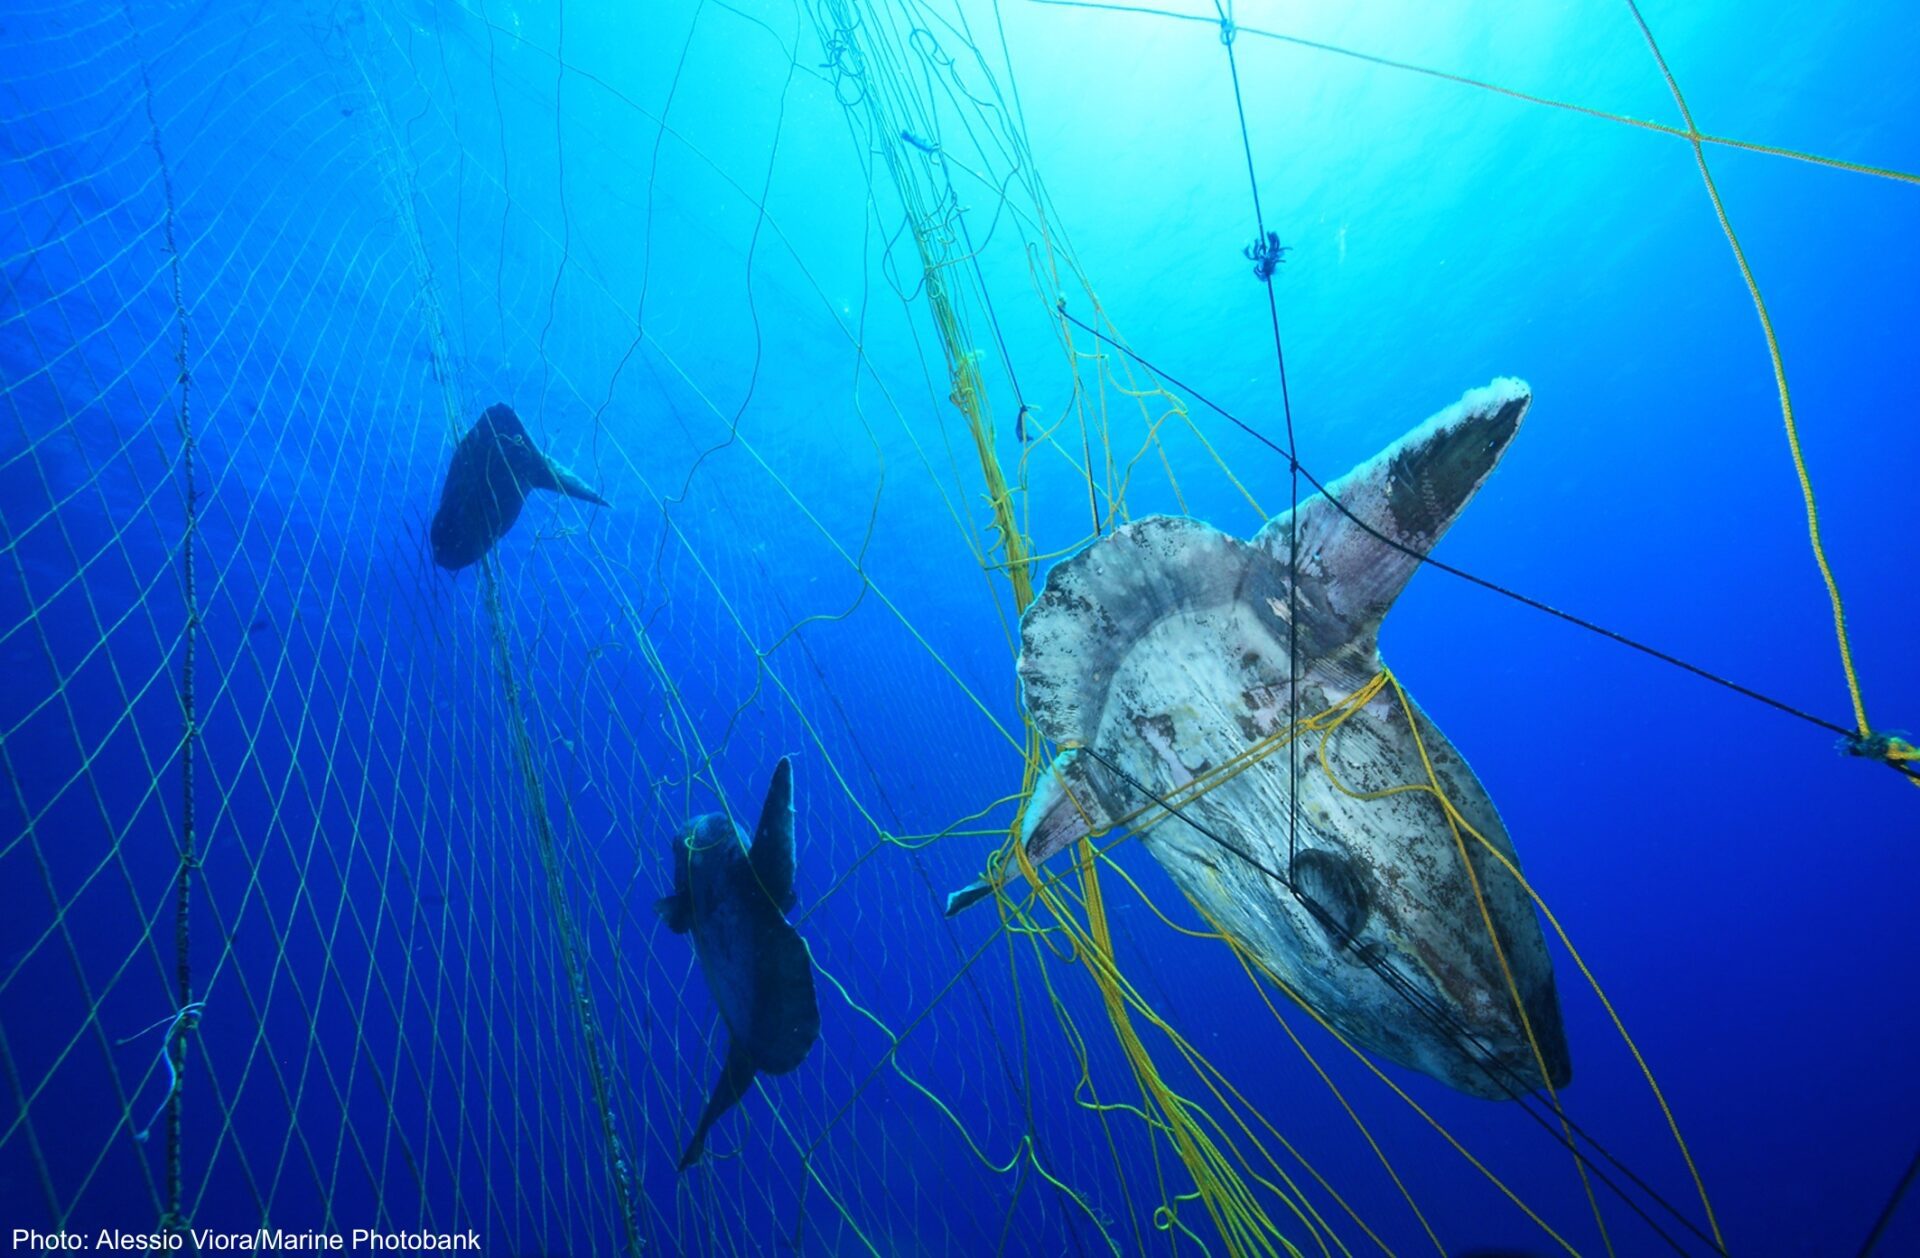 Reining in wasteful fisheries bycatch